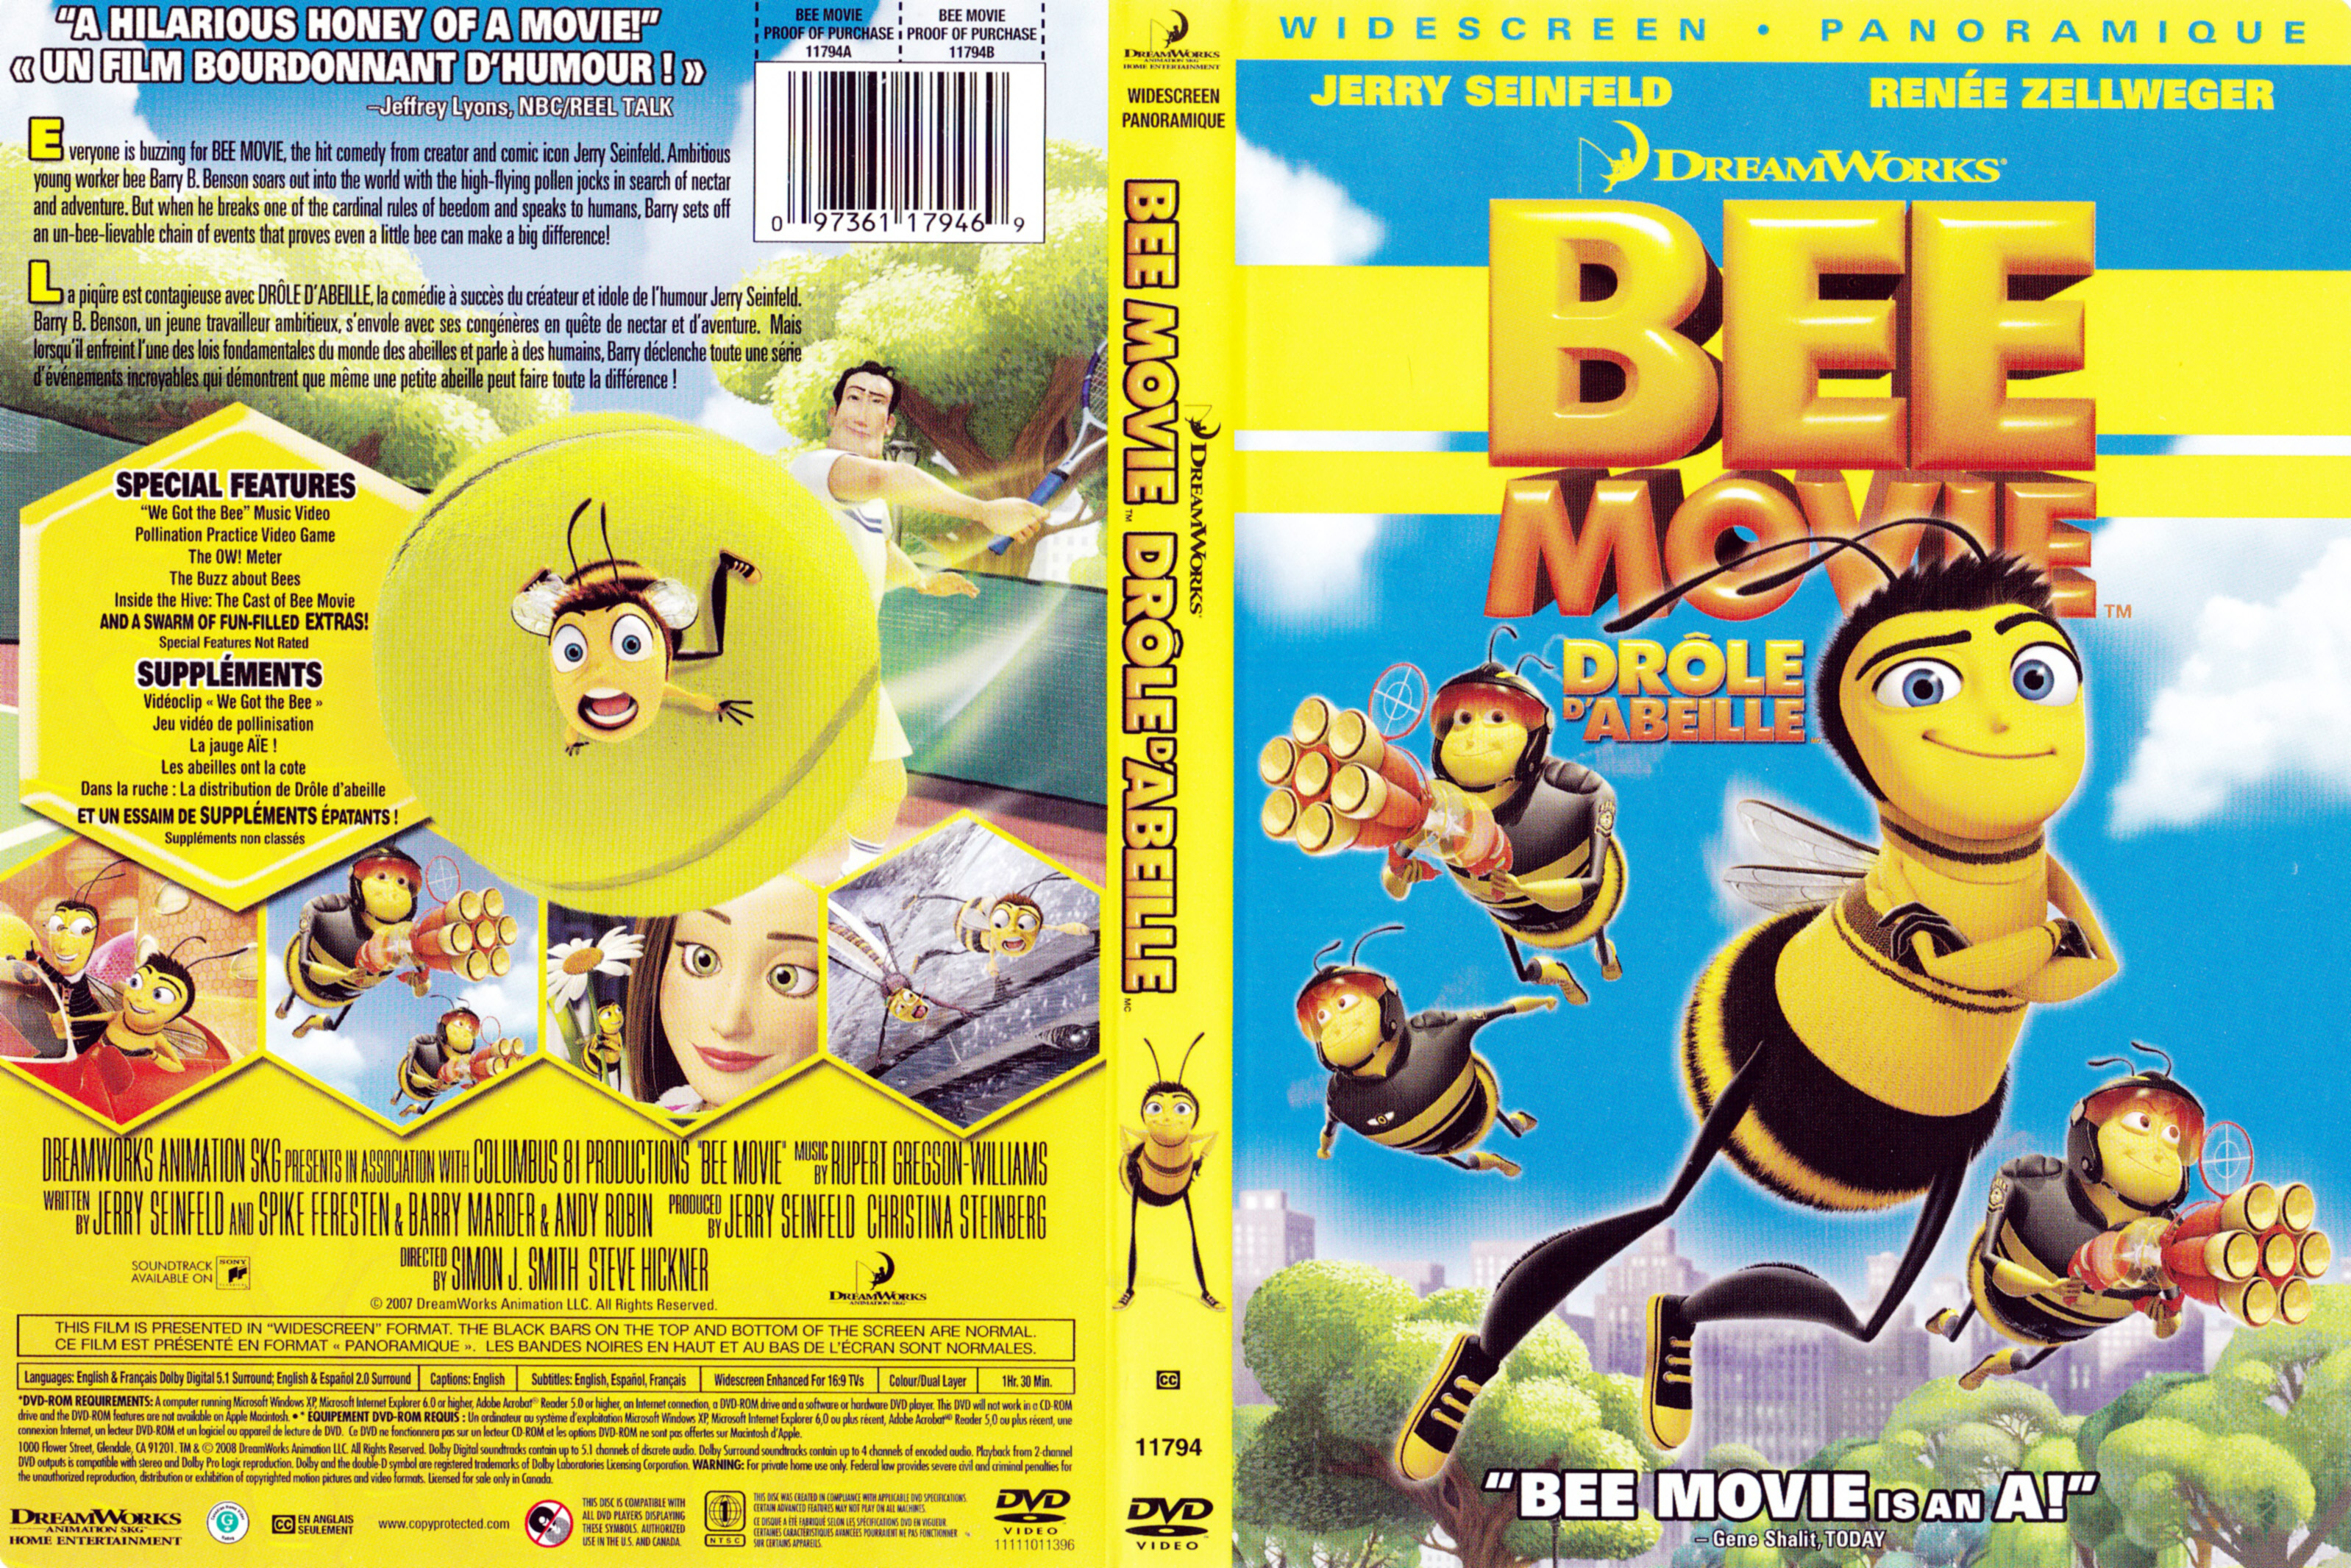 Jaquette DVD Bee movie - Drole